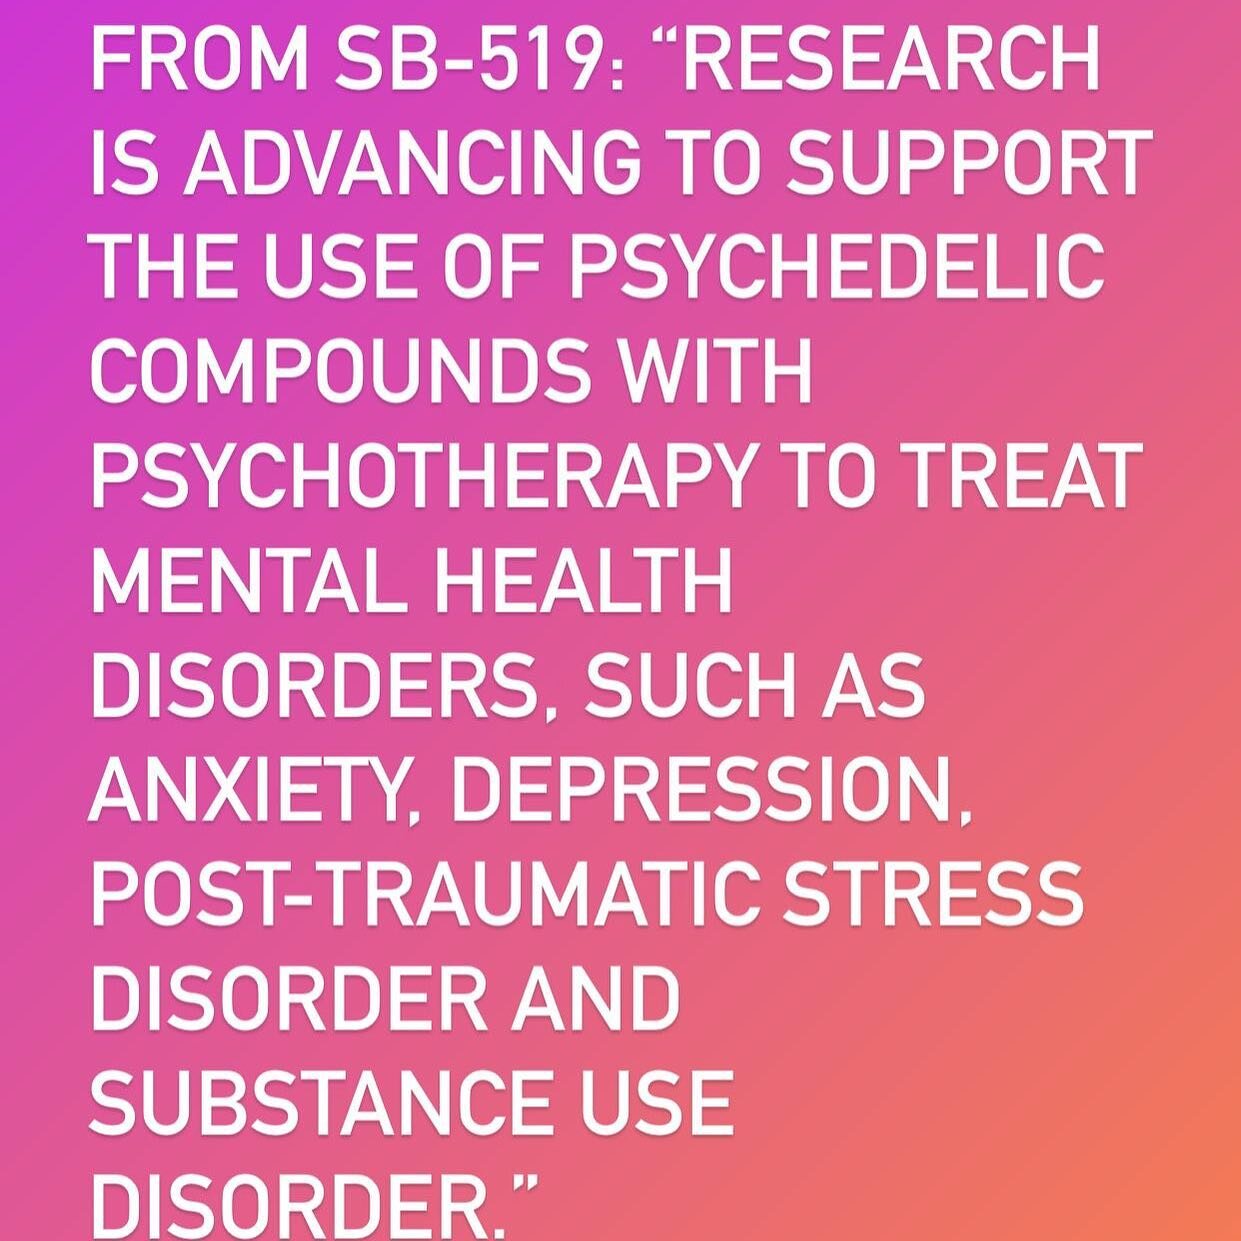 From SB-519: &ldquo;Research is advancing to support the use of psychedelic compounds with psychotherapy to treat mental health disorders, such as anxiety, depression, post-traumatic stress disorder and substance use disorder.&rdquo; #decriminalizena